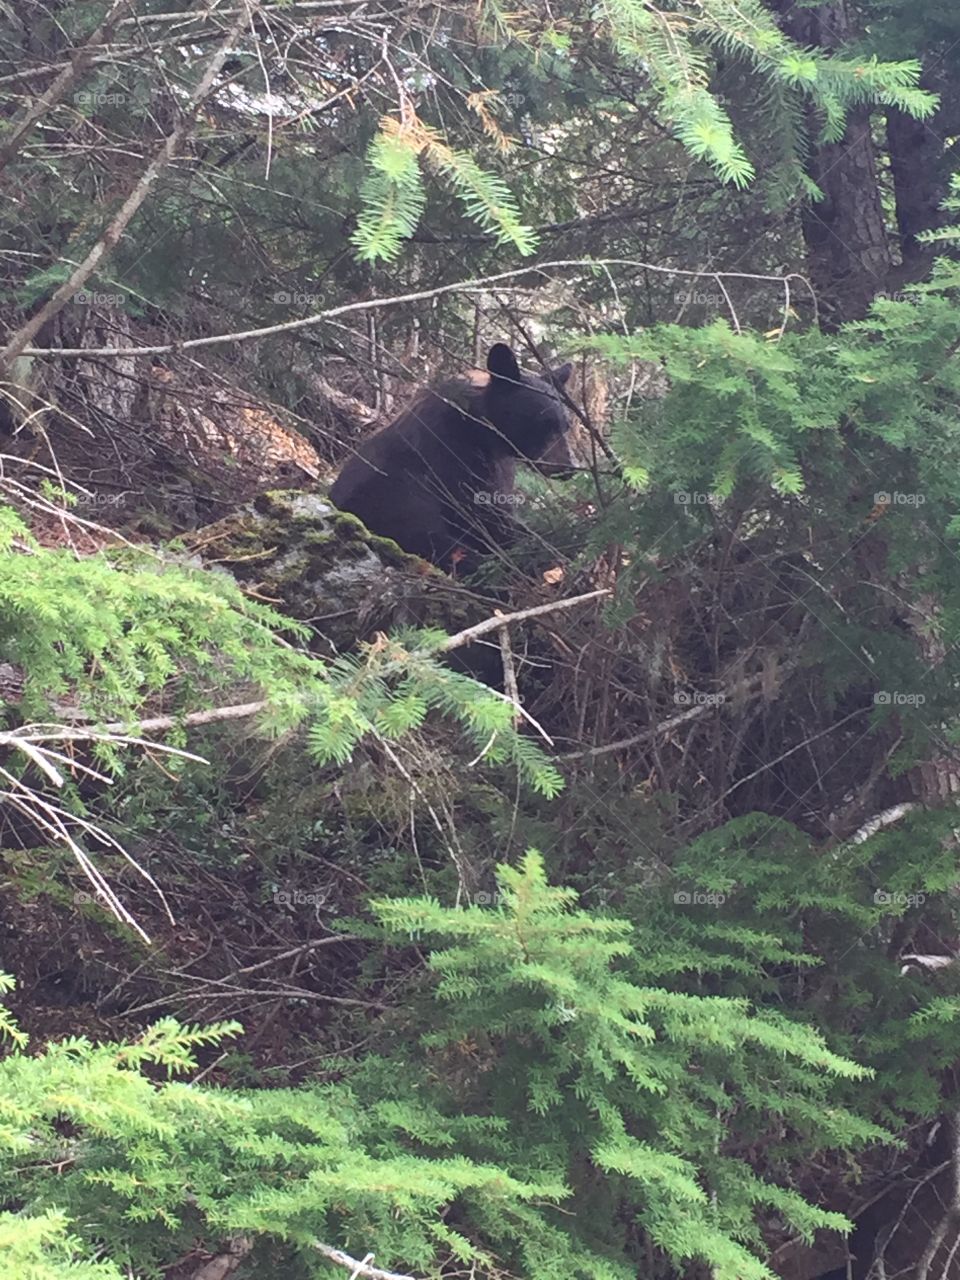 Black bear cub with a brown striped back found off the trails of Nitka Lake in Whistler, British Columbia.